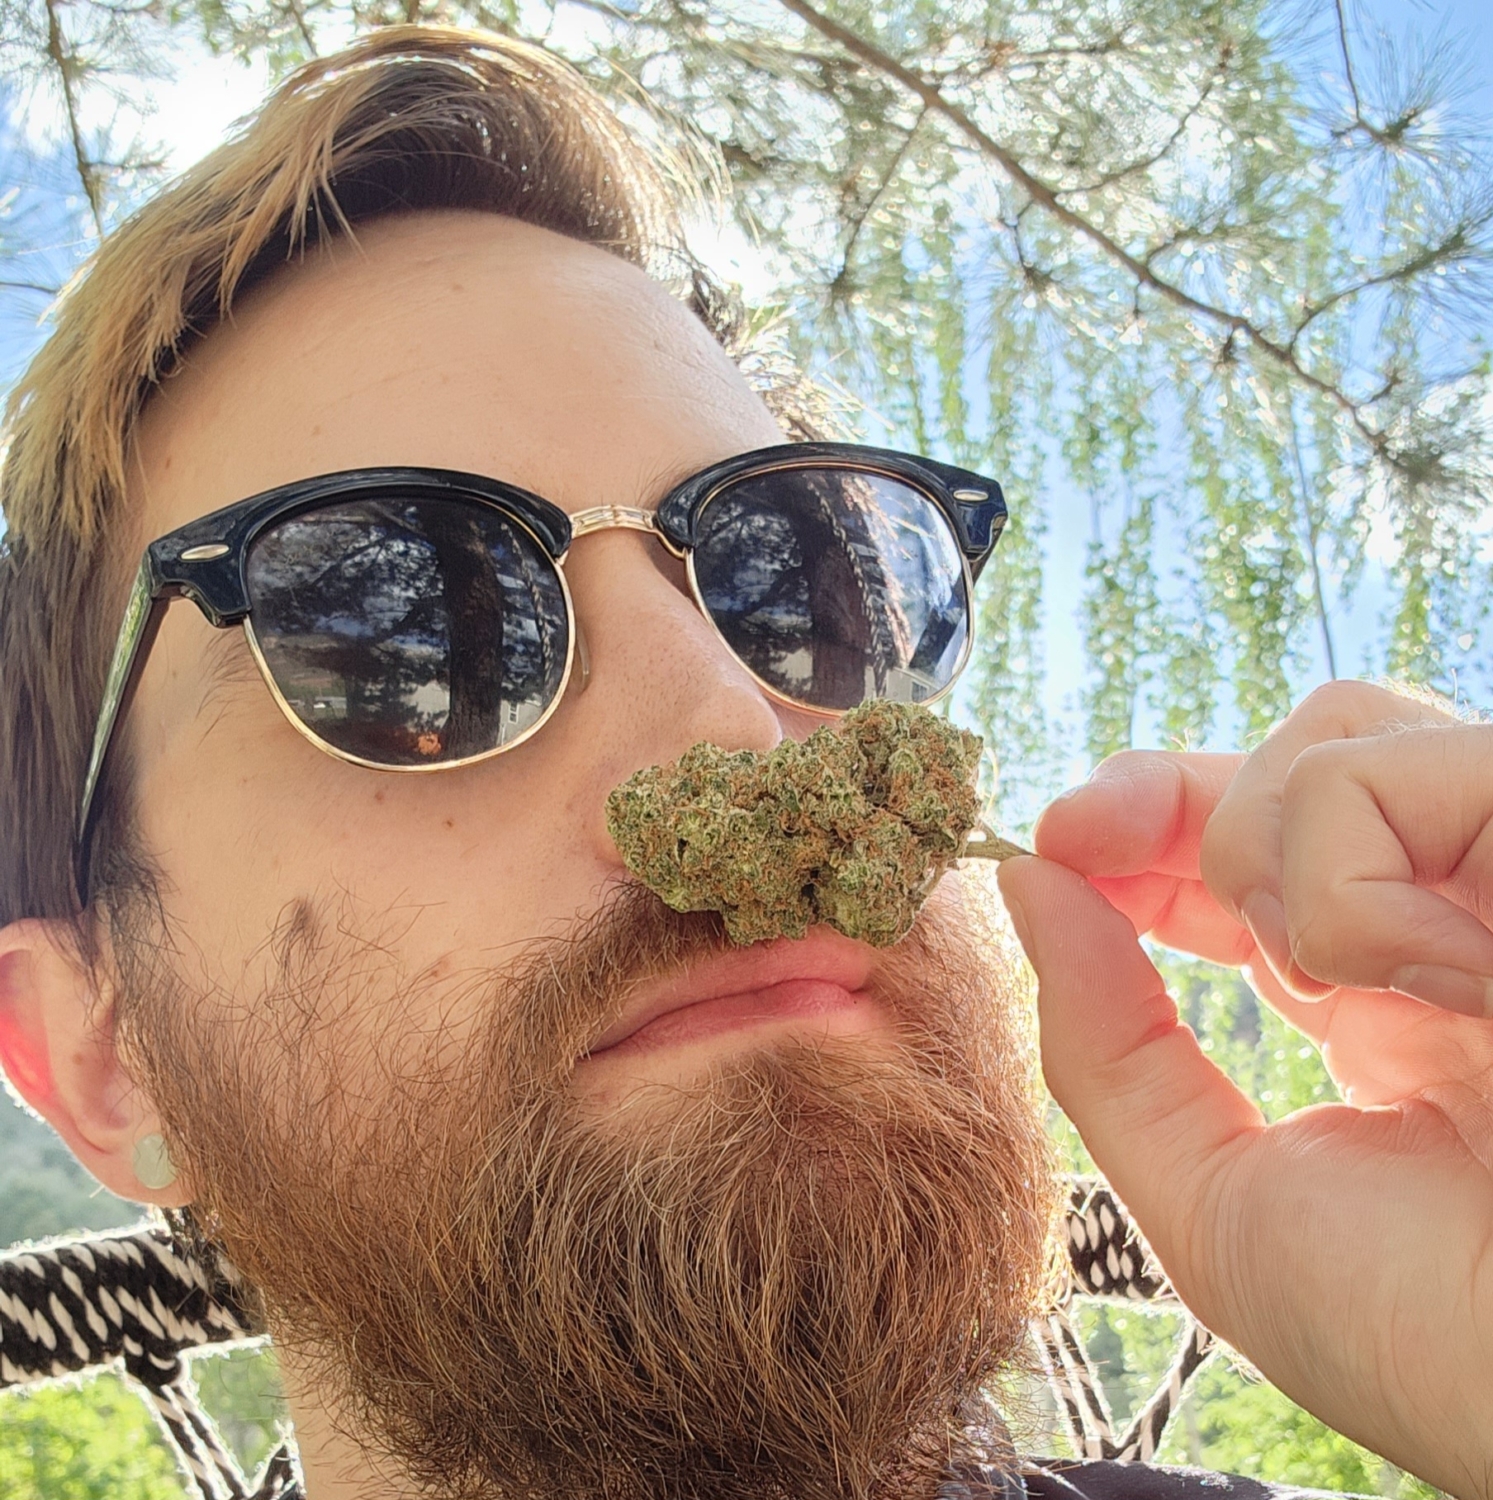 man with sunglasses and a bread smelling marijuana